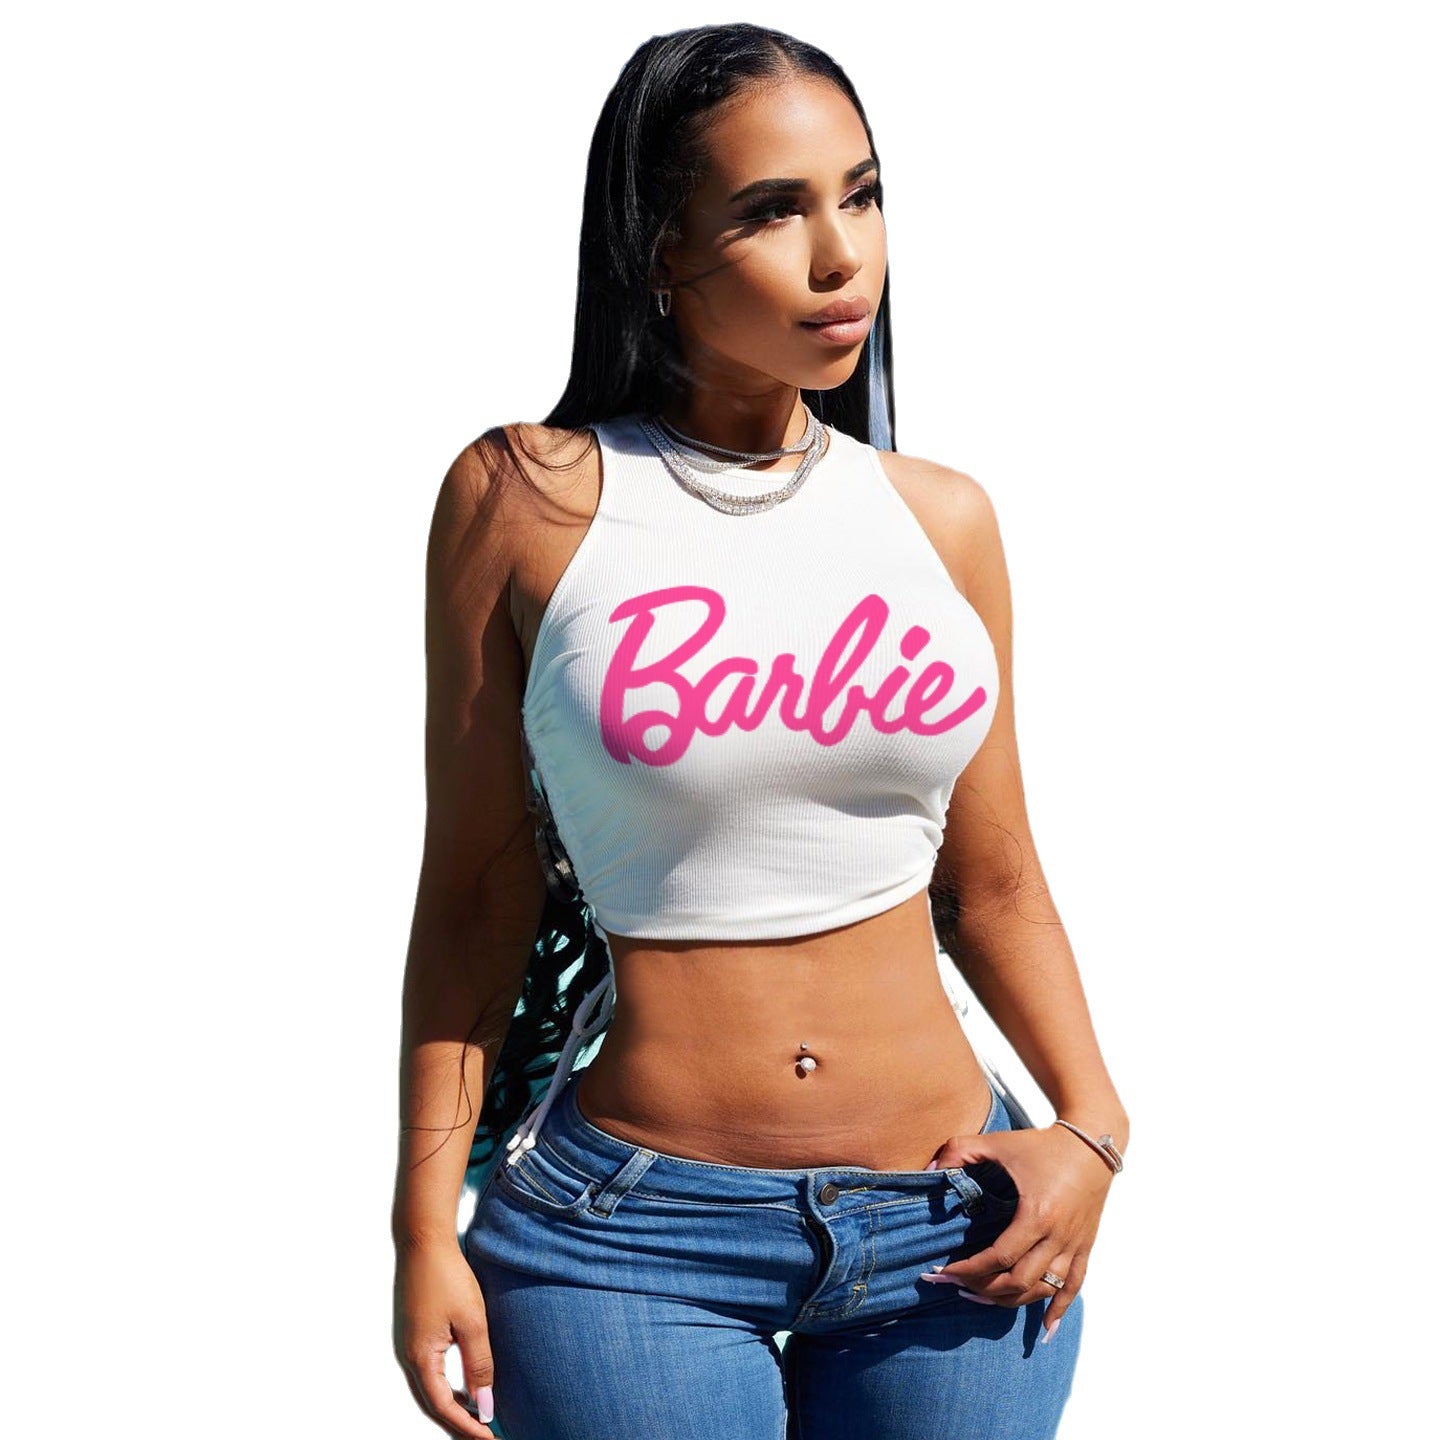 BamBam Printed sleeveless sexy vest spring and summer t-shirt fashion women's tops - BamBam